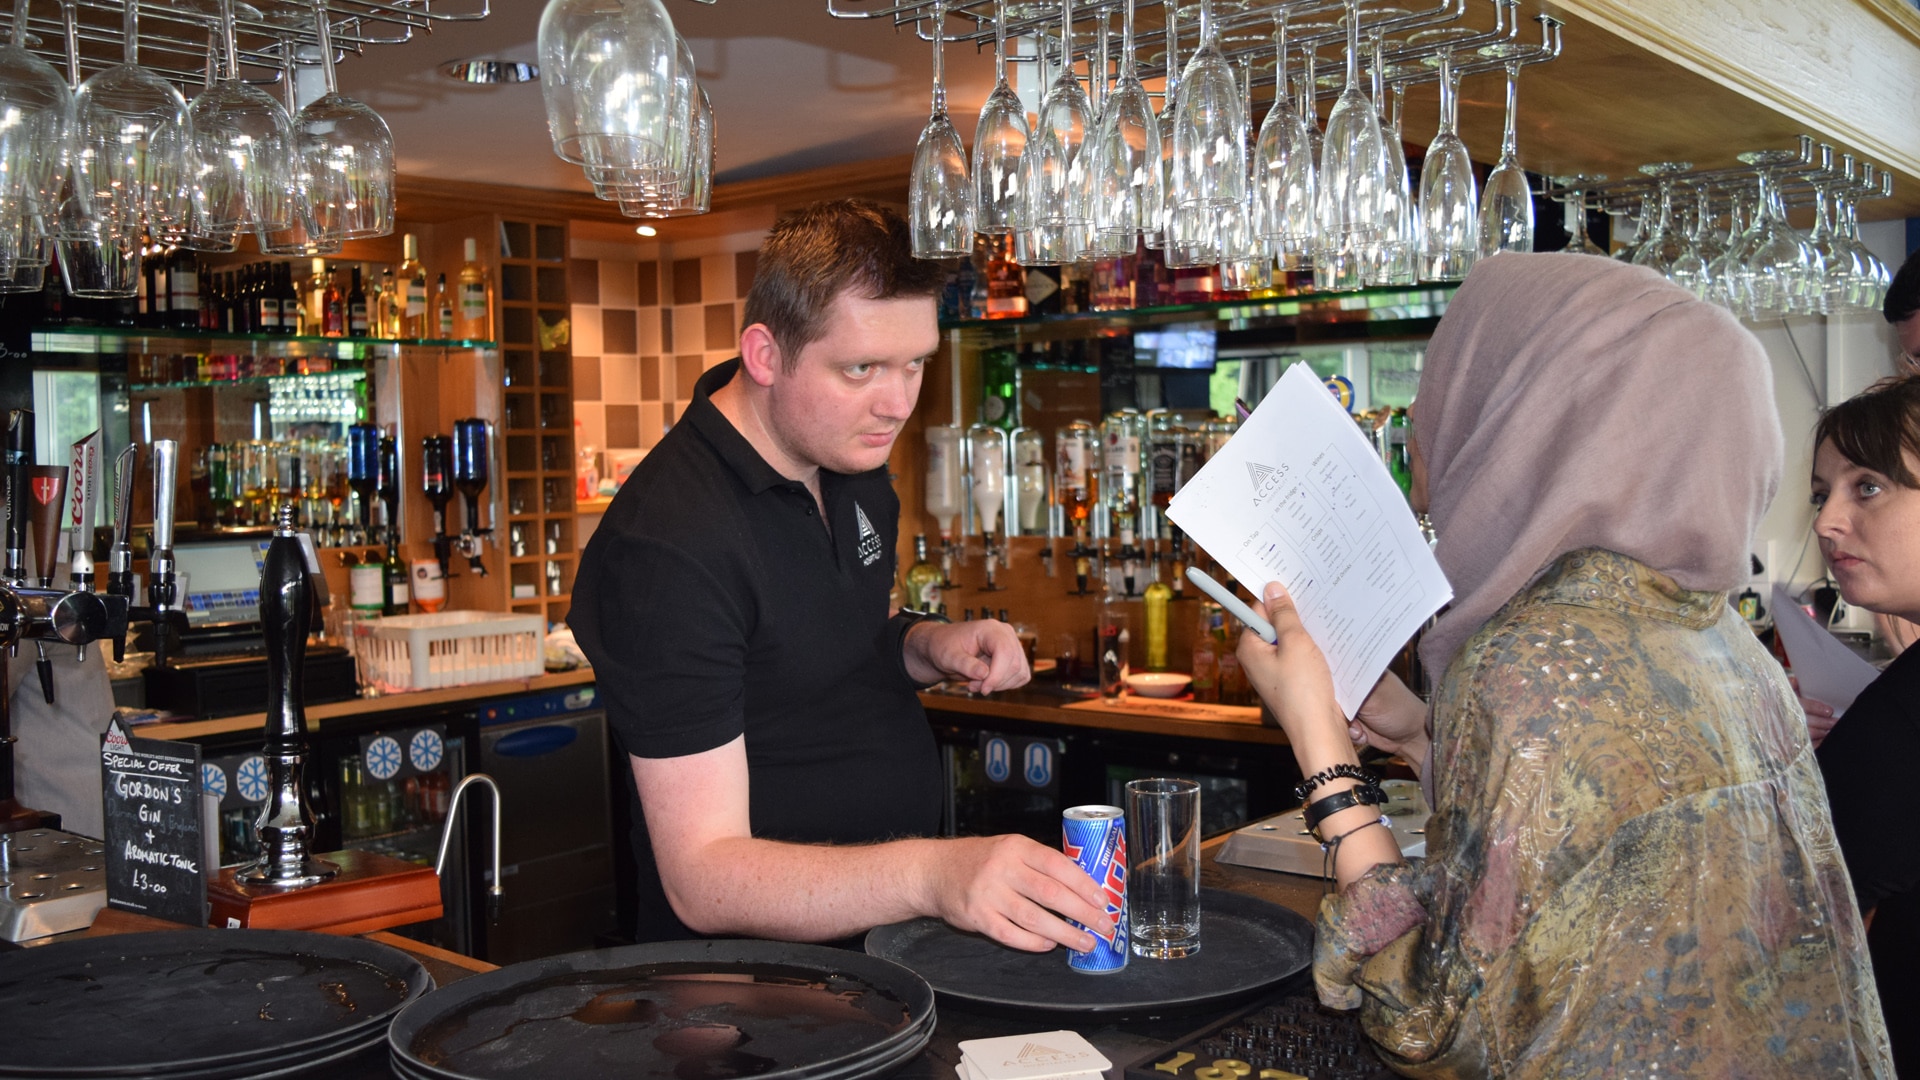 Magpies member behind a bar serving a drink to a customer